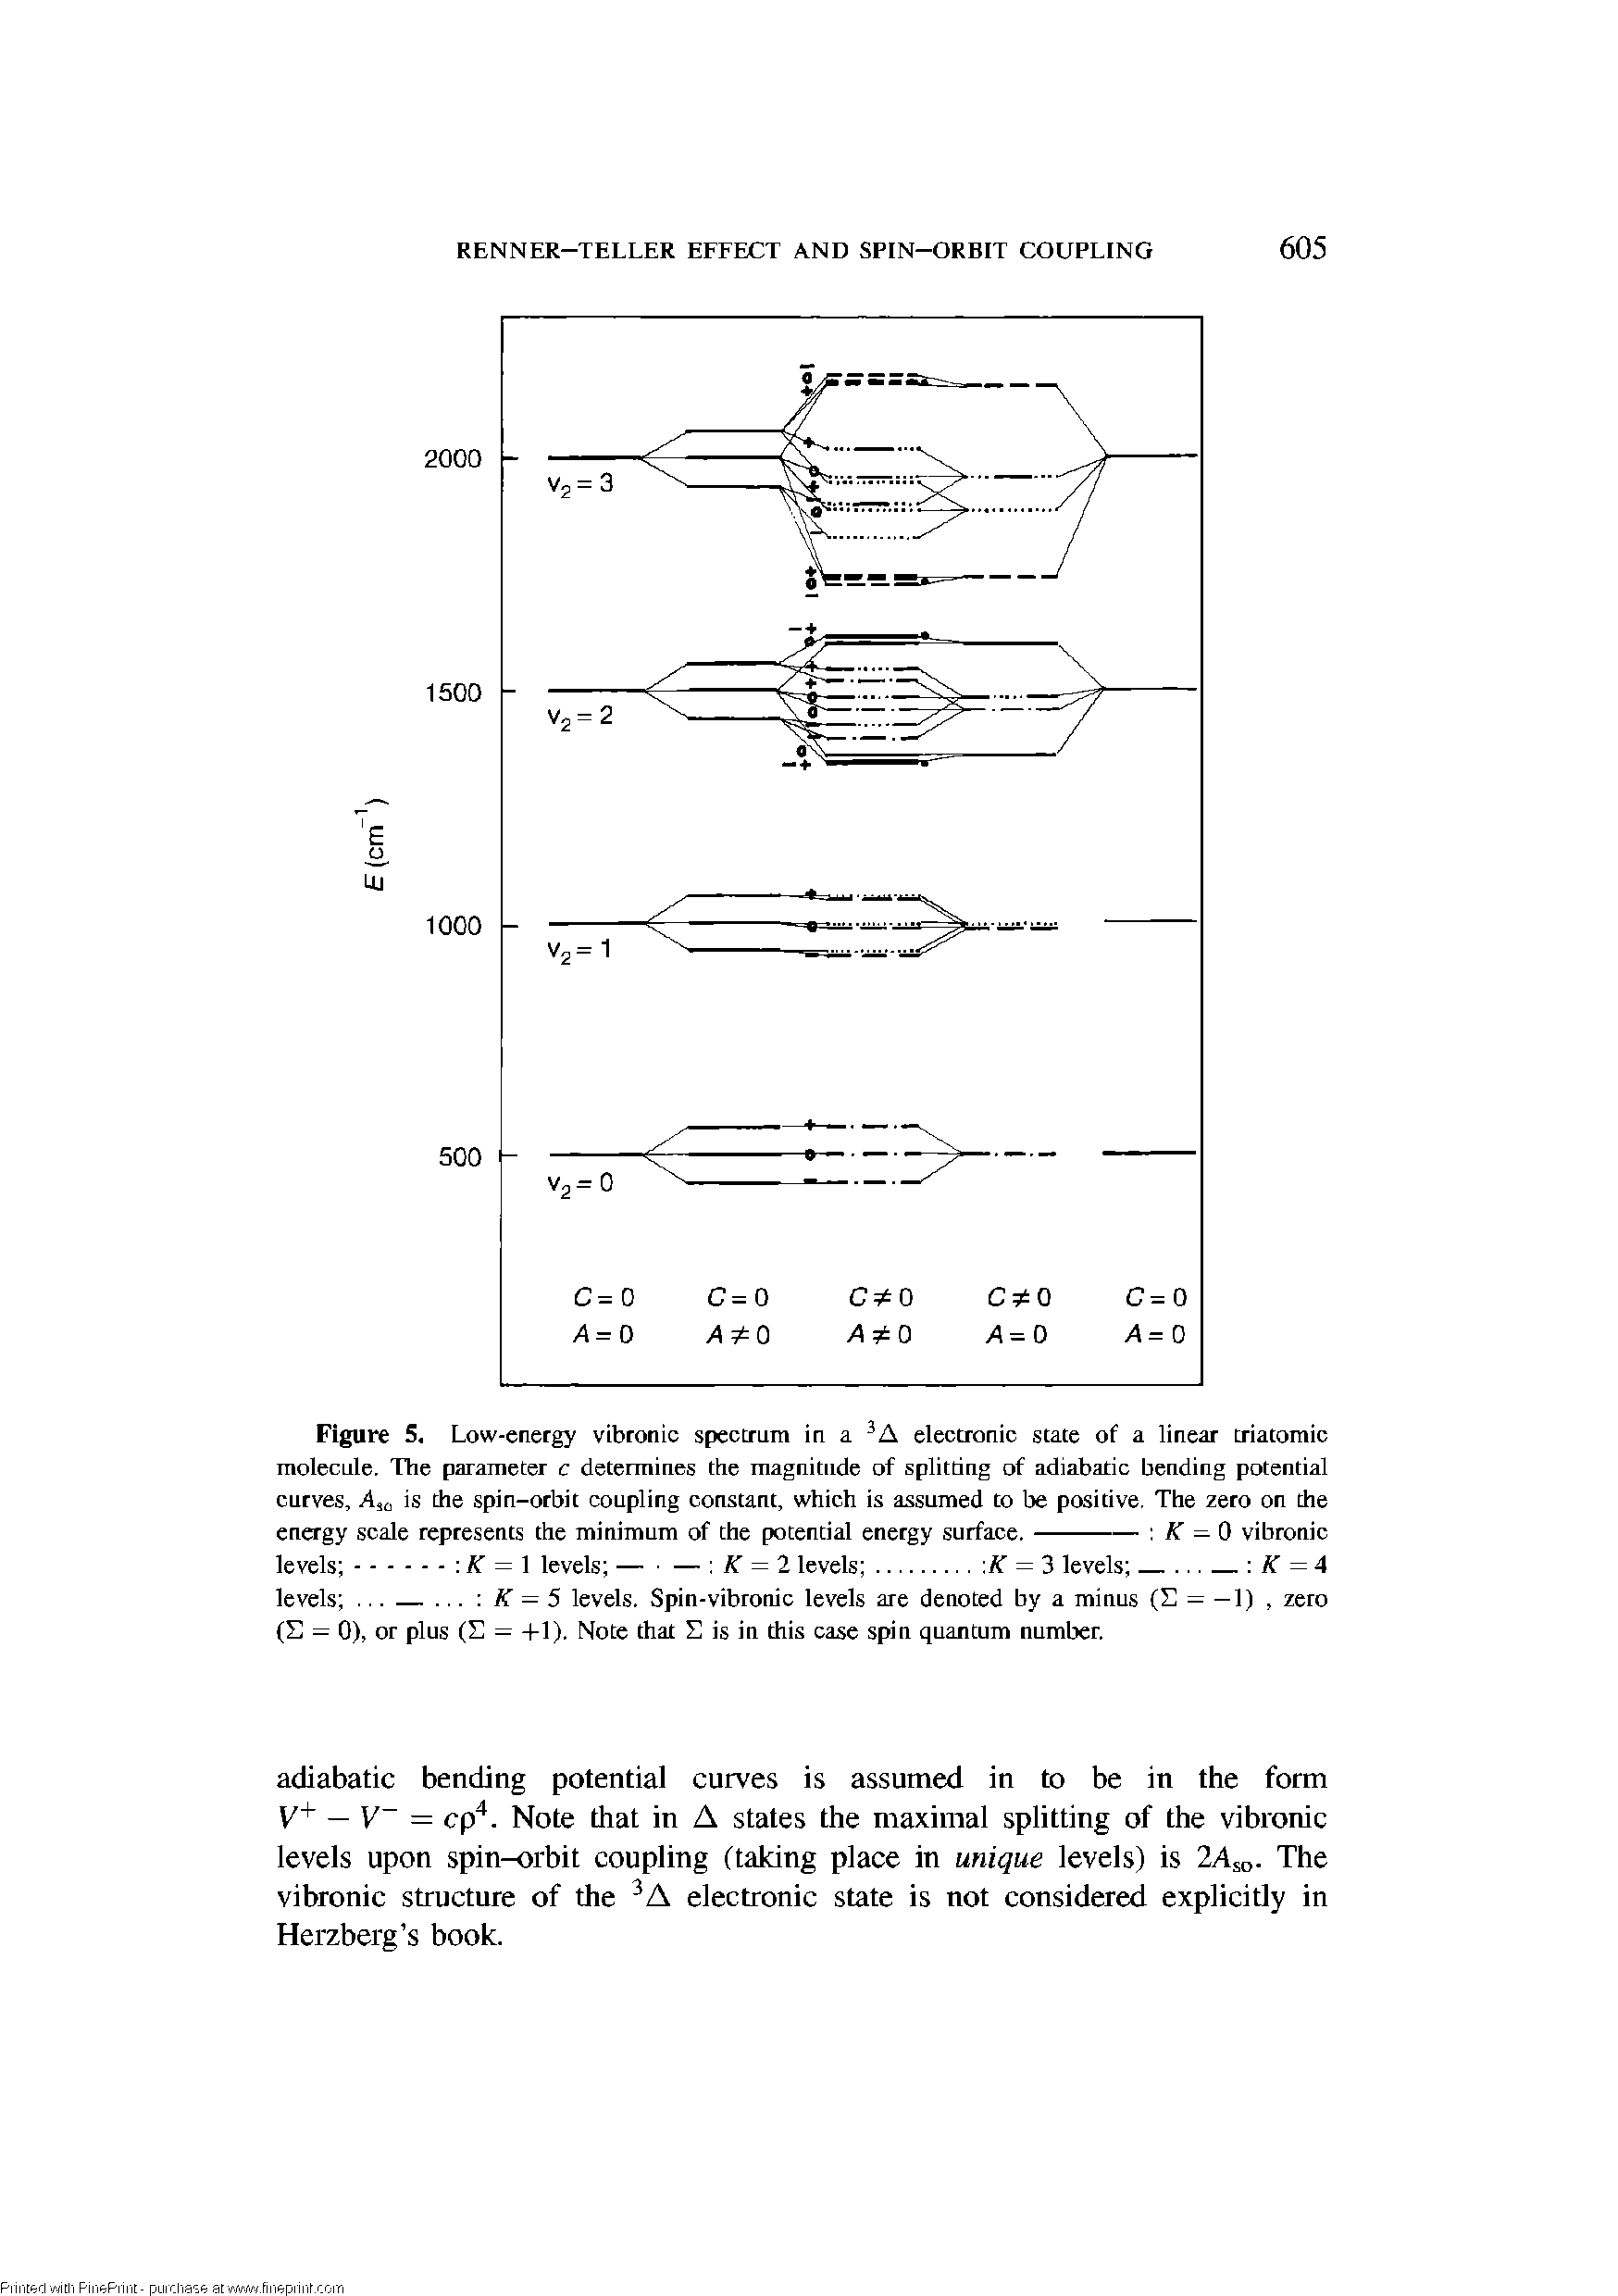 Figure 5, Low-eriergy vibronic spectrum in a electronic state of a linear triatomic molecule. The parameter c determines the magnitude of splitting of adiabatic bending potential curves, is the spin-orbit coupling constant, which is assumed to be positive. The zero on the...